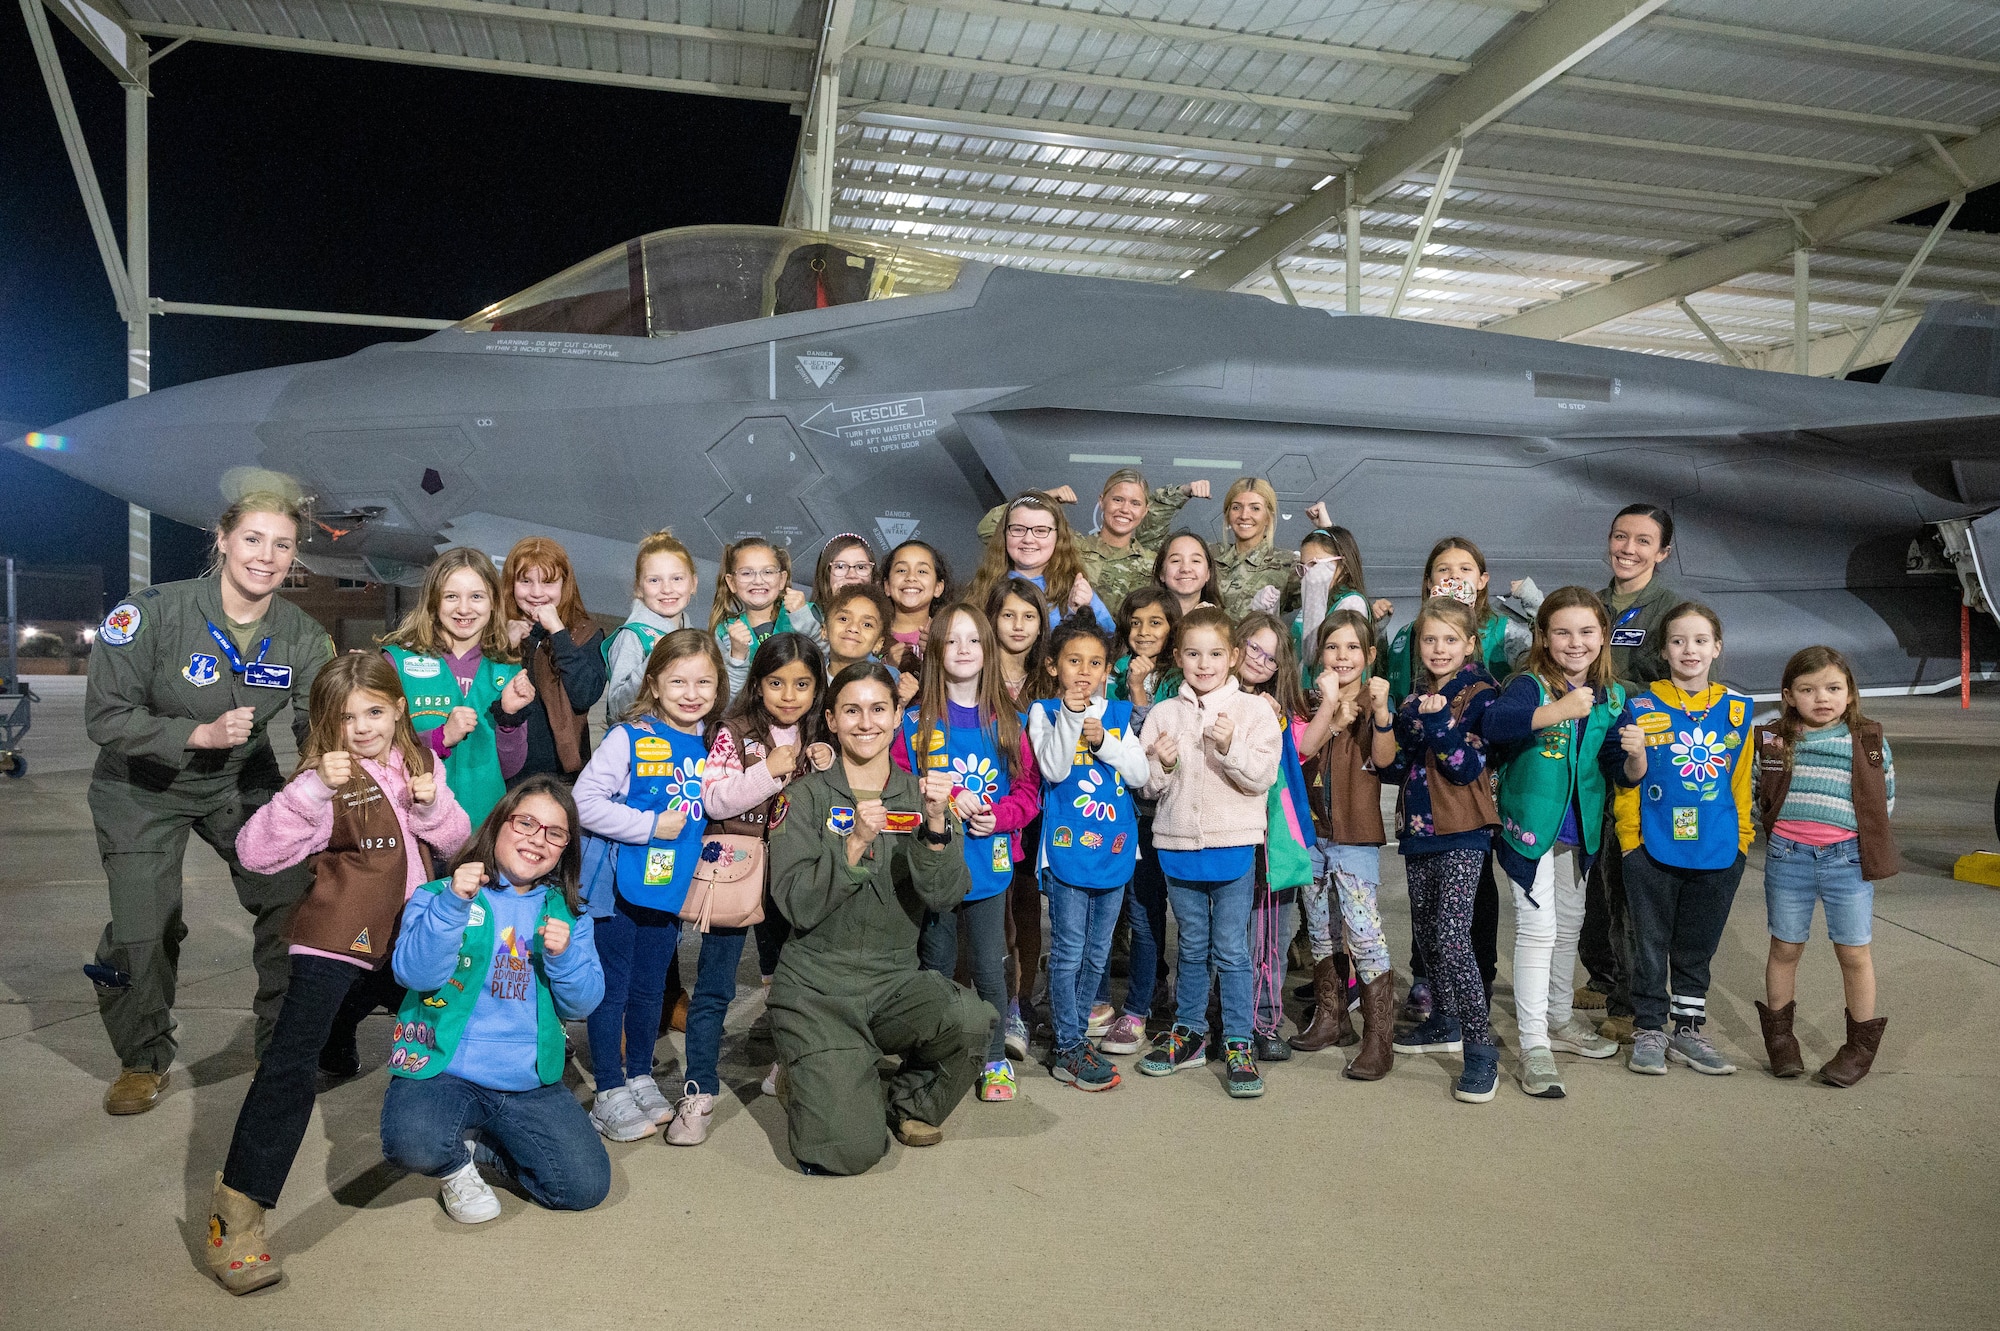 U.S. Air Force Airmen from the 62nd Fighter Squadron and 62nd Aircraft Maintenance Unit, and a local Girl Scouts troop pose for a picture in front of an F-35A Lightning II aircraft Jan. 11, 2023, at Luke Air Force Base, Arizona.